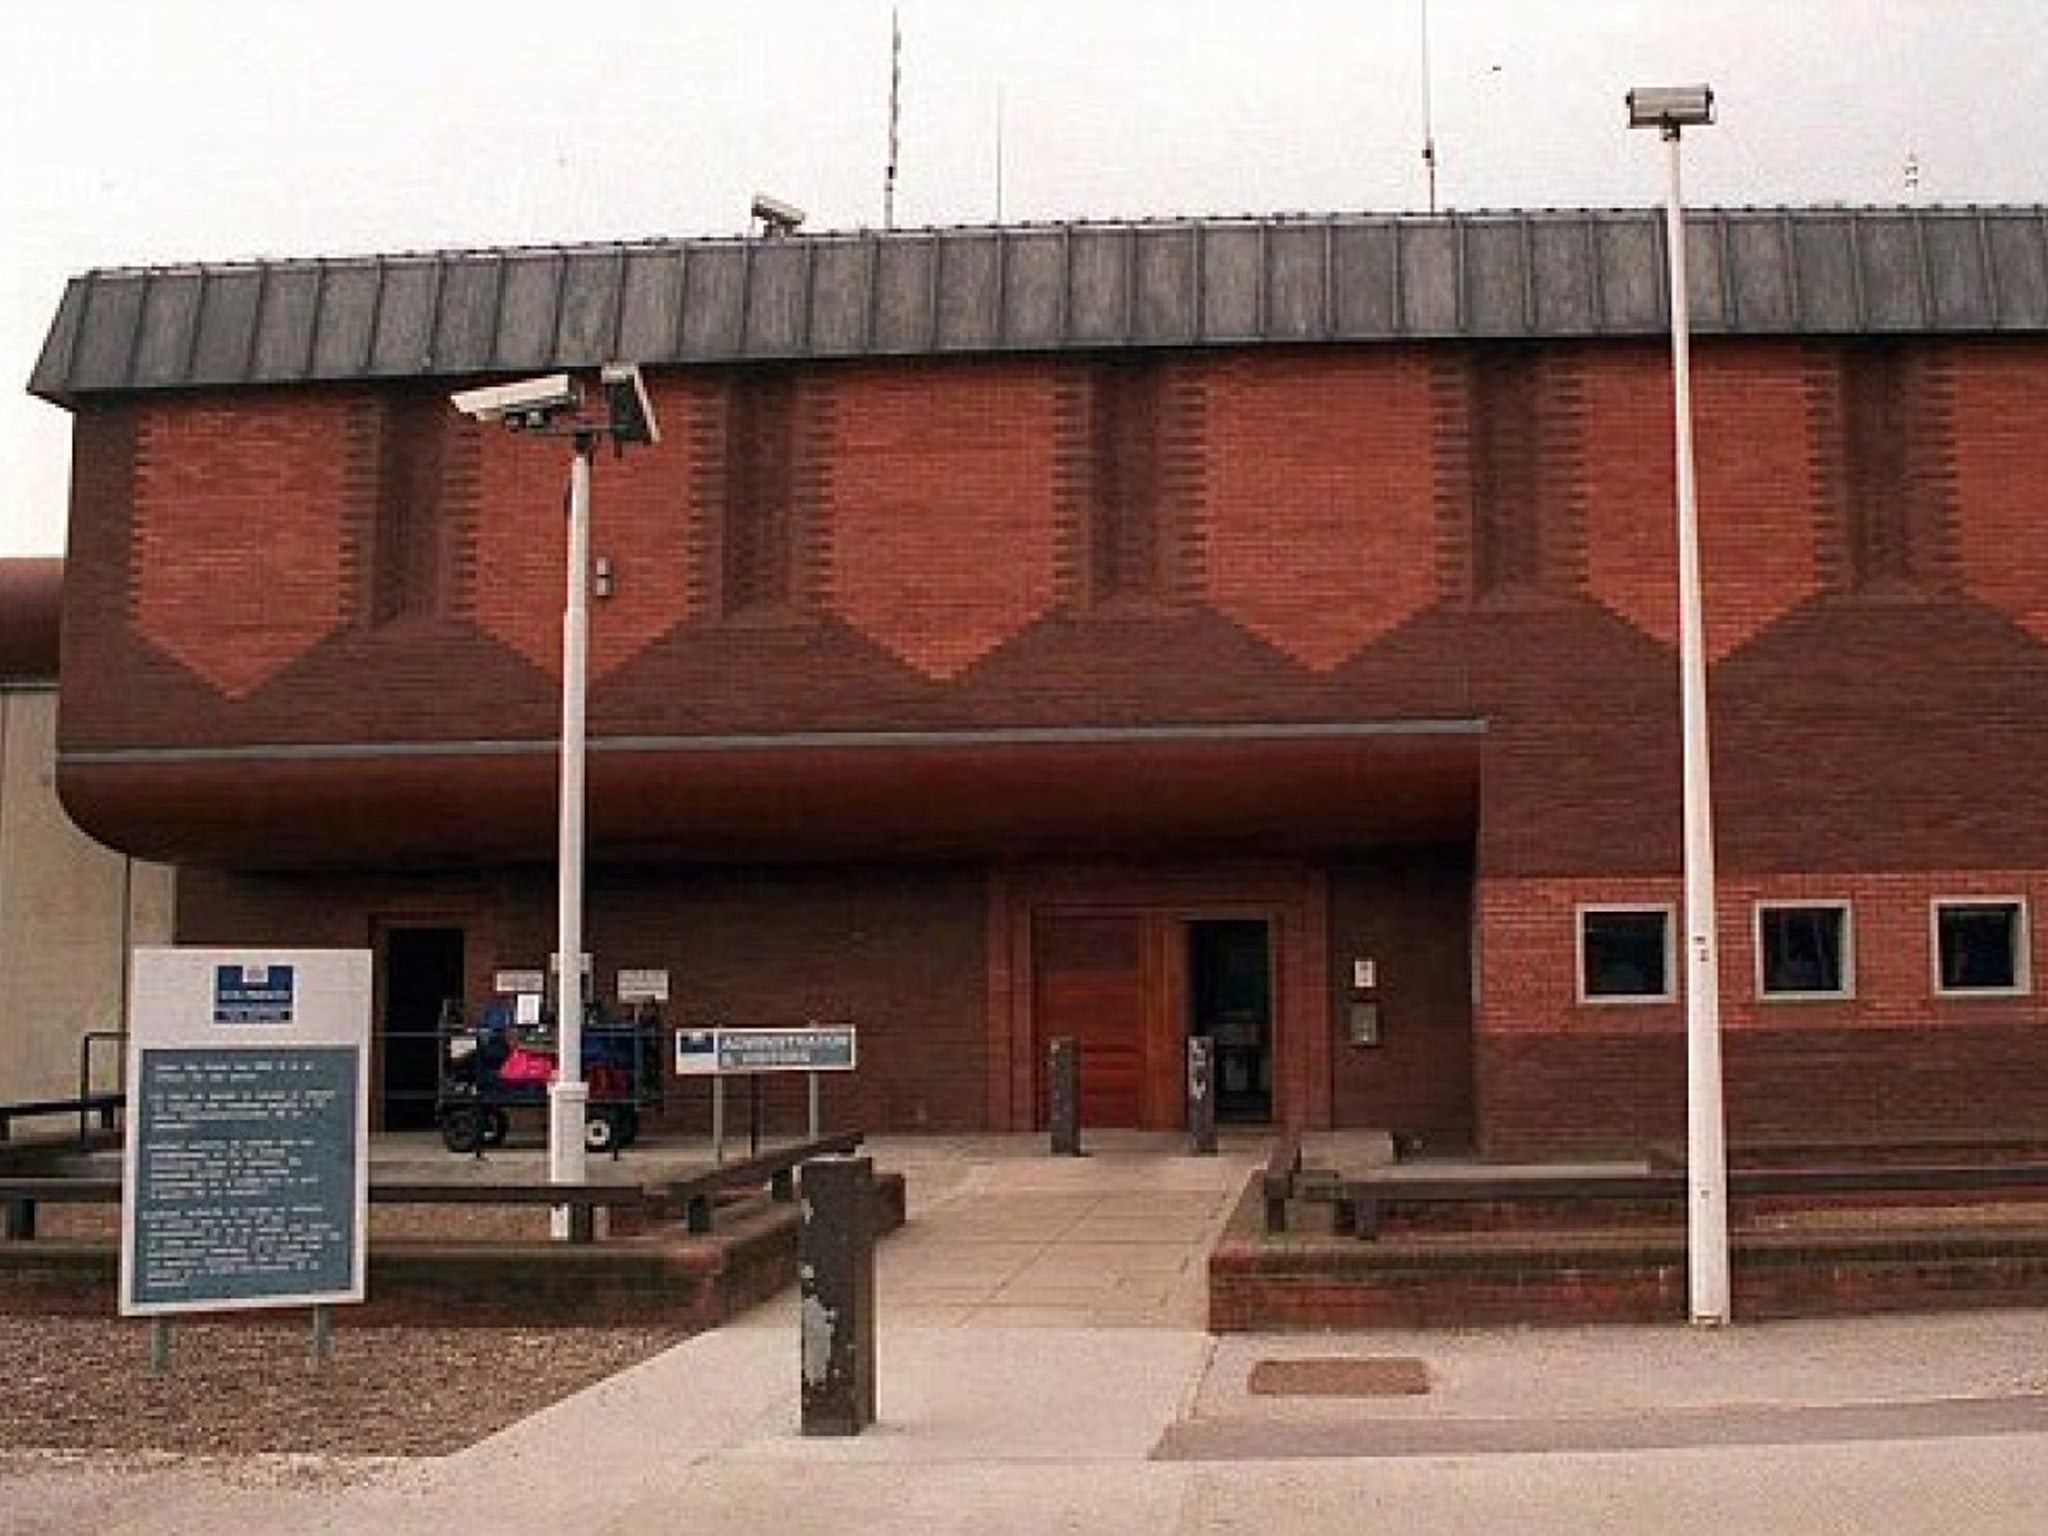 The attack happened at Full Sutton prison in Yorkshire